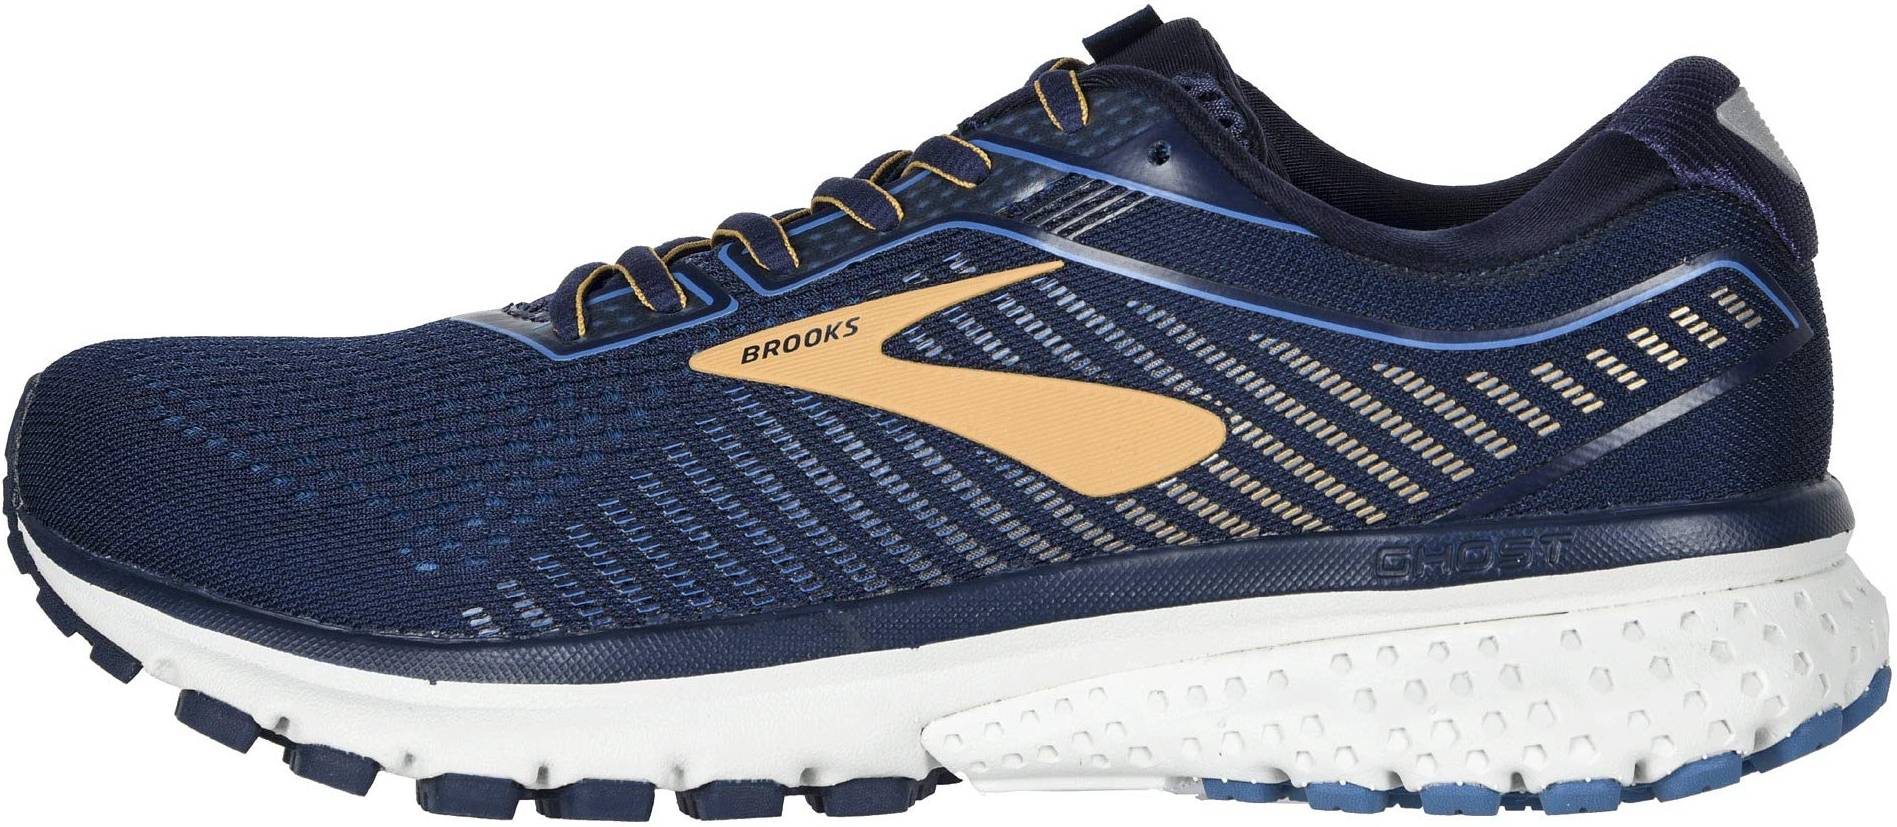 Save 30% on Wide Running Shoes (265 